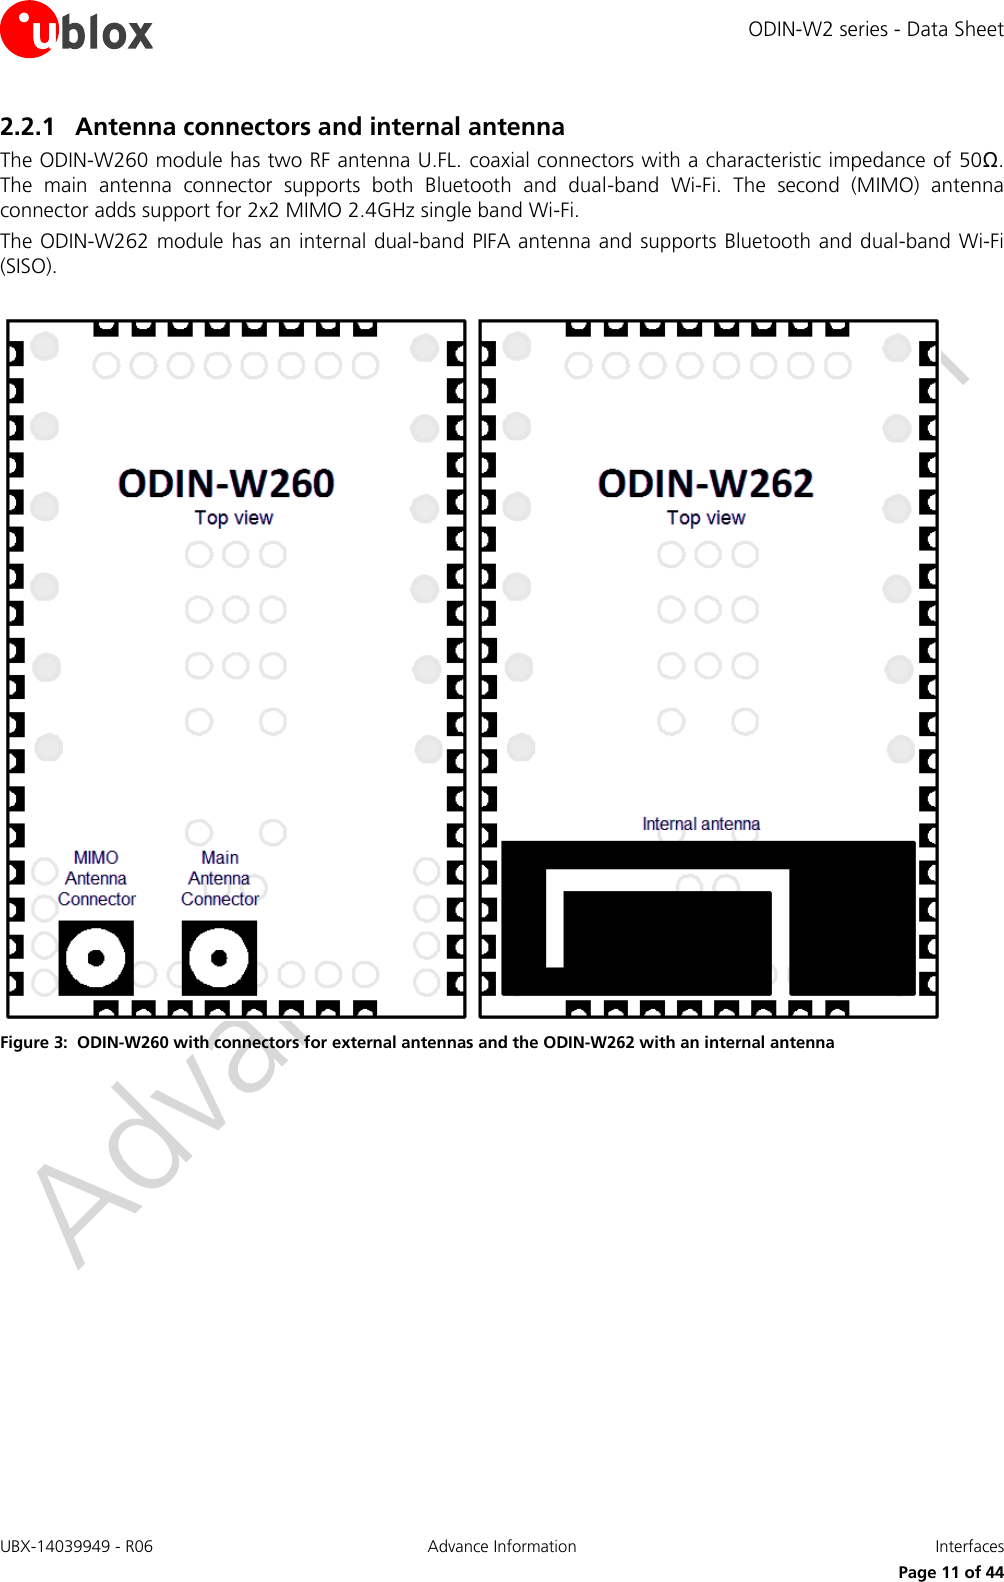 ODIN-W2 series - Data Sheet UBX-14039949 - R06 Advance Information  Interfaces     Page 11 of 44 2.2.1 Antenna connectors and internal antenna The ODIN-W260 module has two RF antenna U.FL. coaxial connectors with a characteristic impedance of 50Ω. The  main  antenna  connector  supports  both  Bluetooth  and  dual-band  Wi-Fi.  The  second  (MIMO)  antenna connector adds support for 2x2 MIMO 2.4GHz single band Wi-Fi.  The ODIN-W262 module has an internal dual-band PIFA antenna and supports Bluetooth and dual-band Wi-Fi (SISO).   Figure 3:  ODIN-W260 with connectors for external antennas and the ODIN-W262 with an internal antenna   